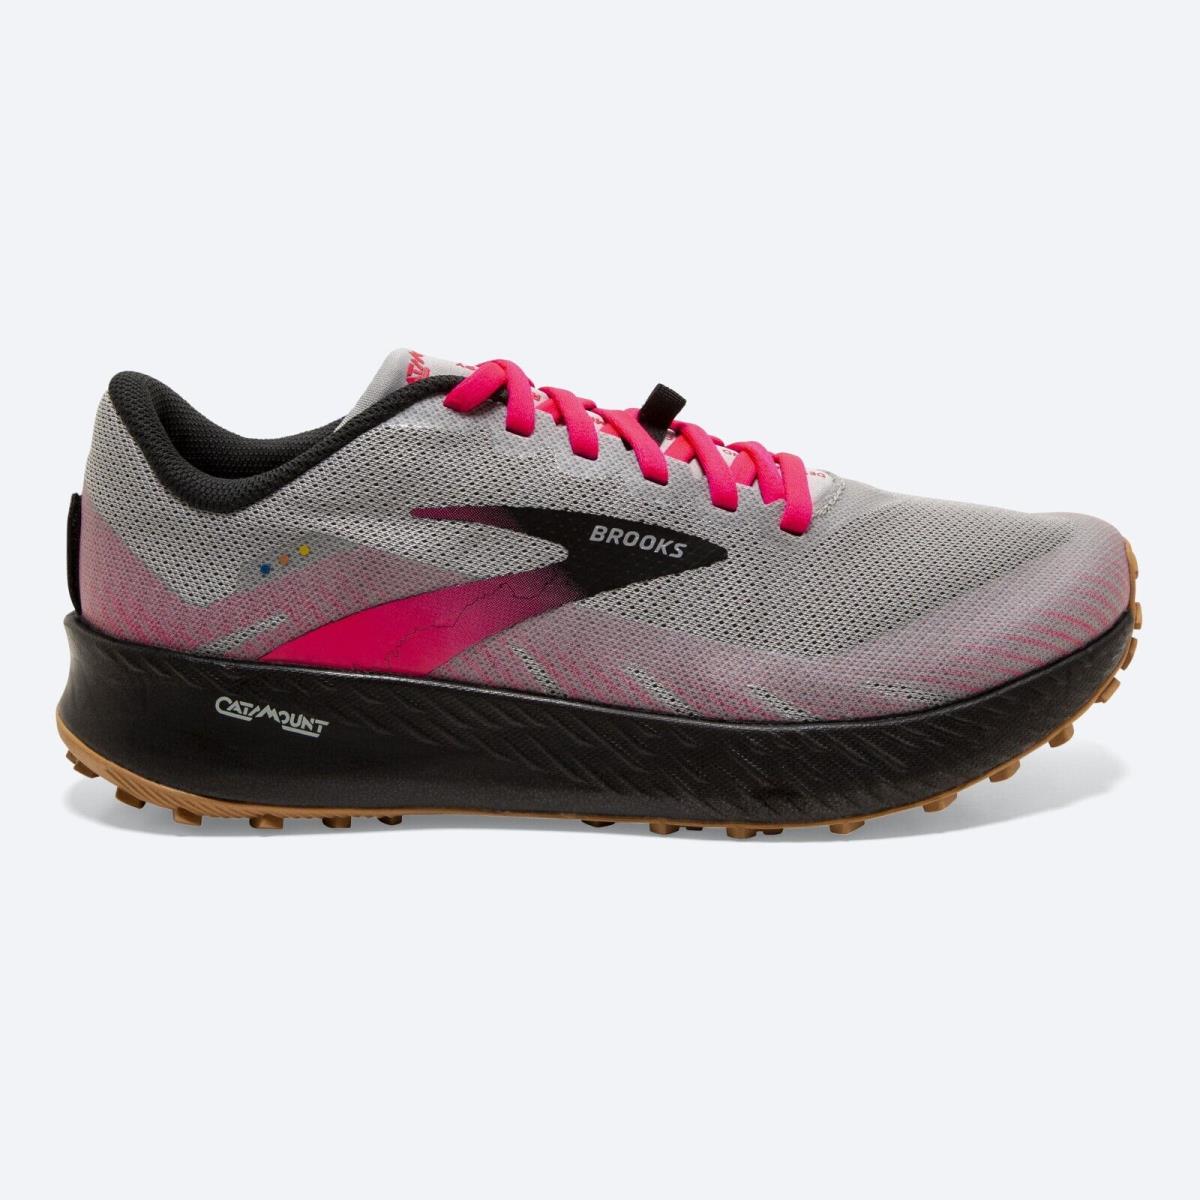 Women`s Brooks Catamount Trail Running Shoes Size 11 Pink Black Silver